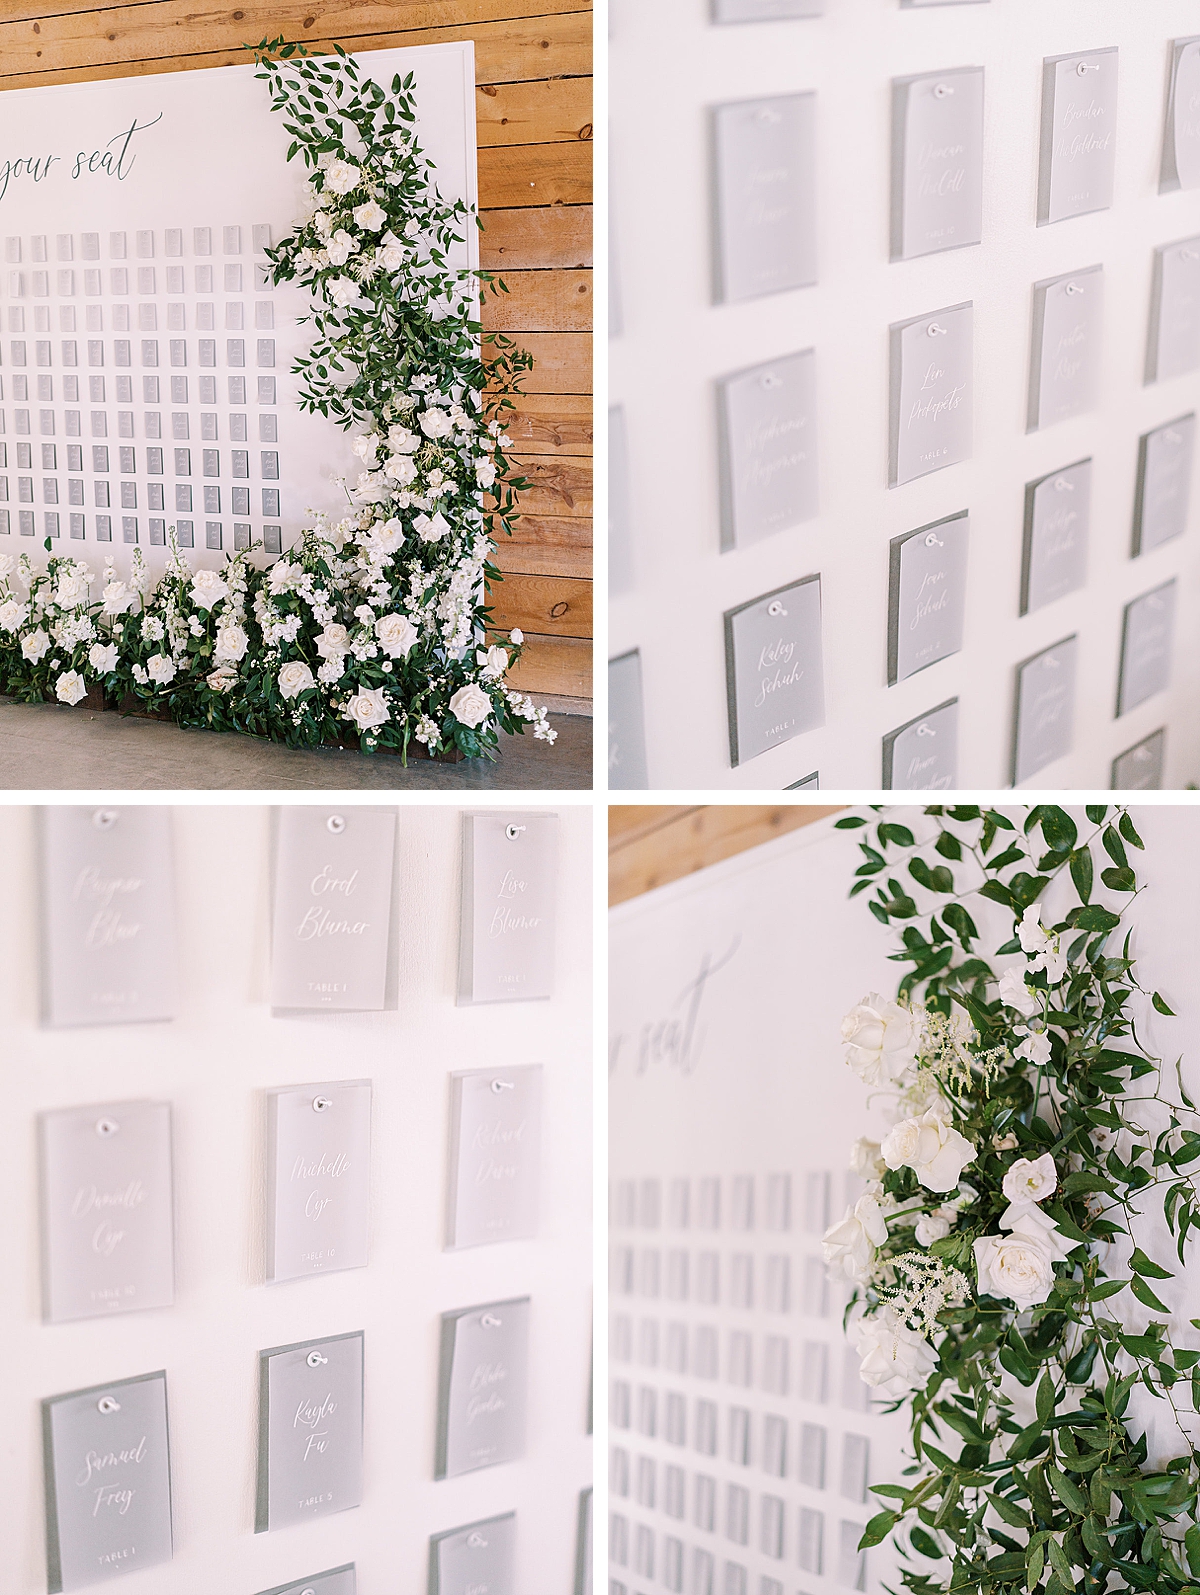 Ombre Escort Wall | Statement Seating Chart Inspiration for Wedding Day | Owl & Envelope | Custom Wedding Signage in Austin, TX | seating chart, escort wall, wedding day signage | via owlandenvelope.com